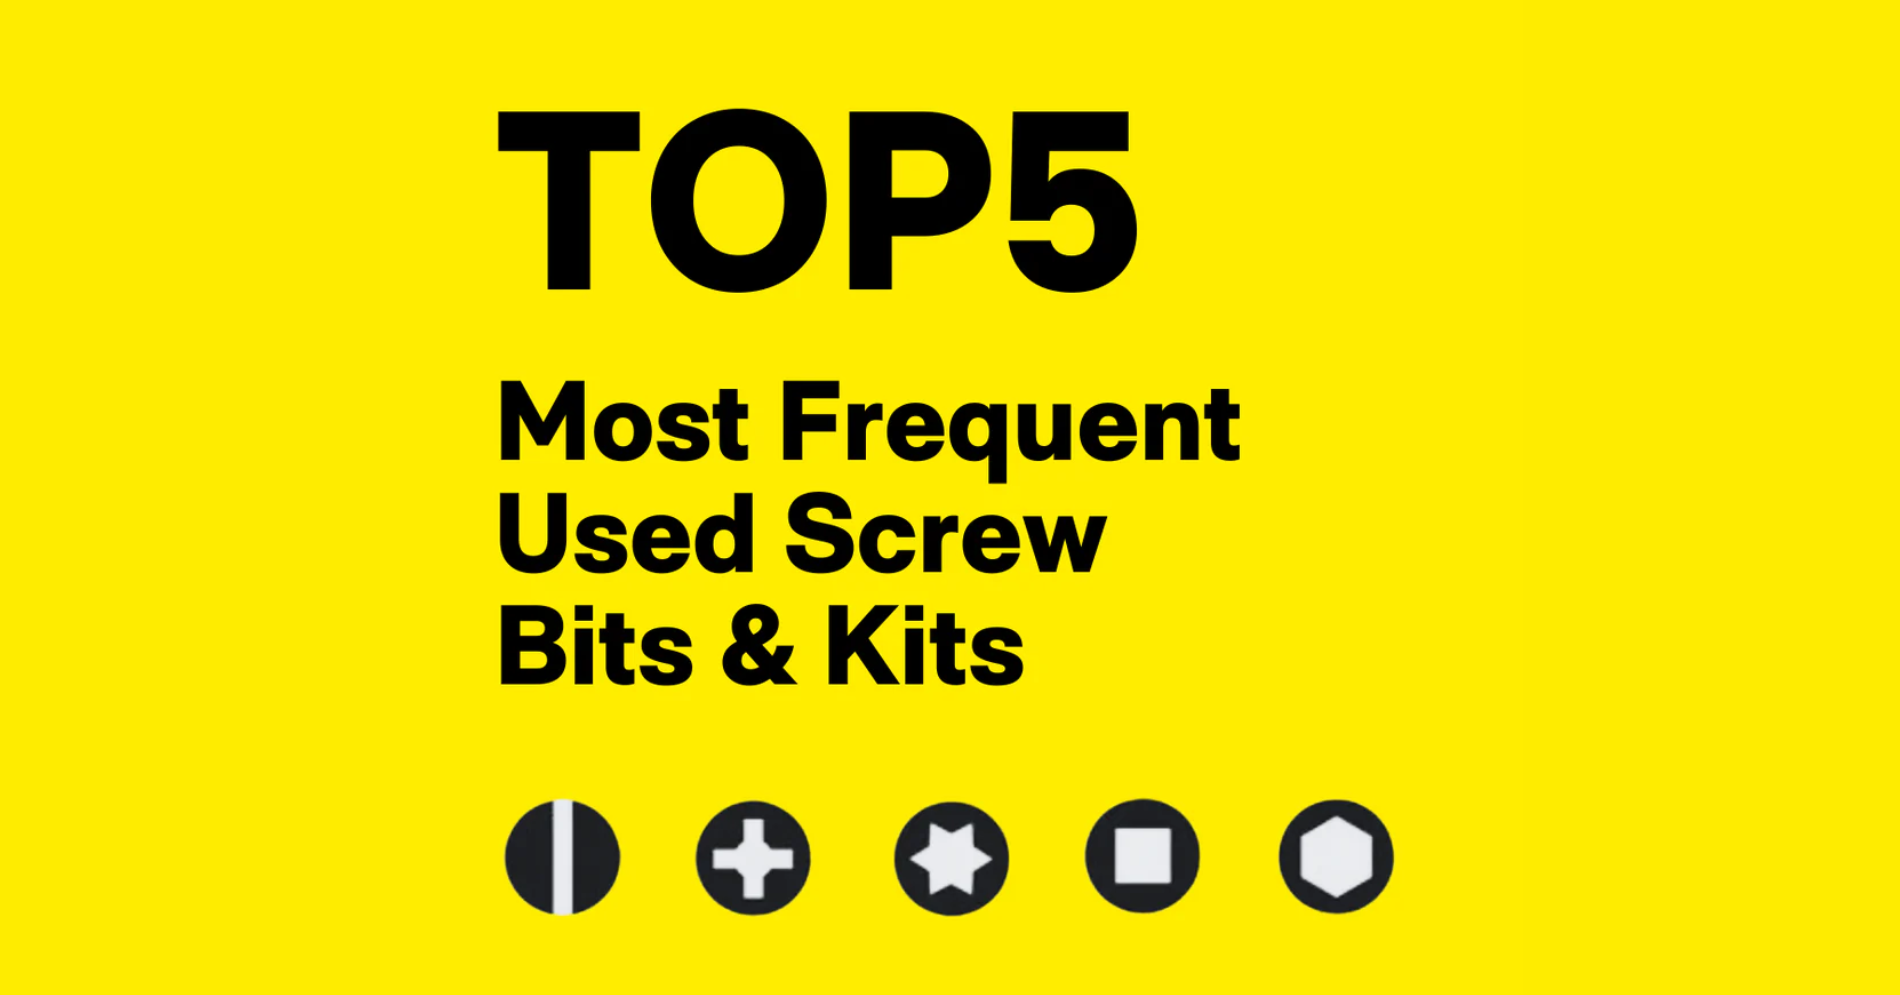 Top 5 Most Frequently Used Screw Bits & Kits